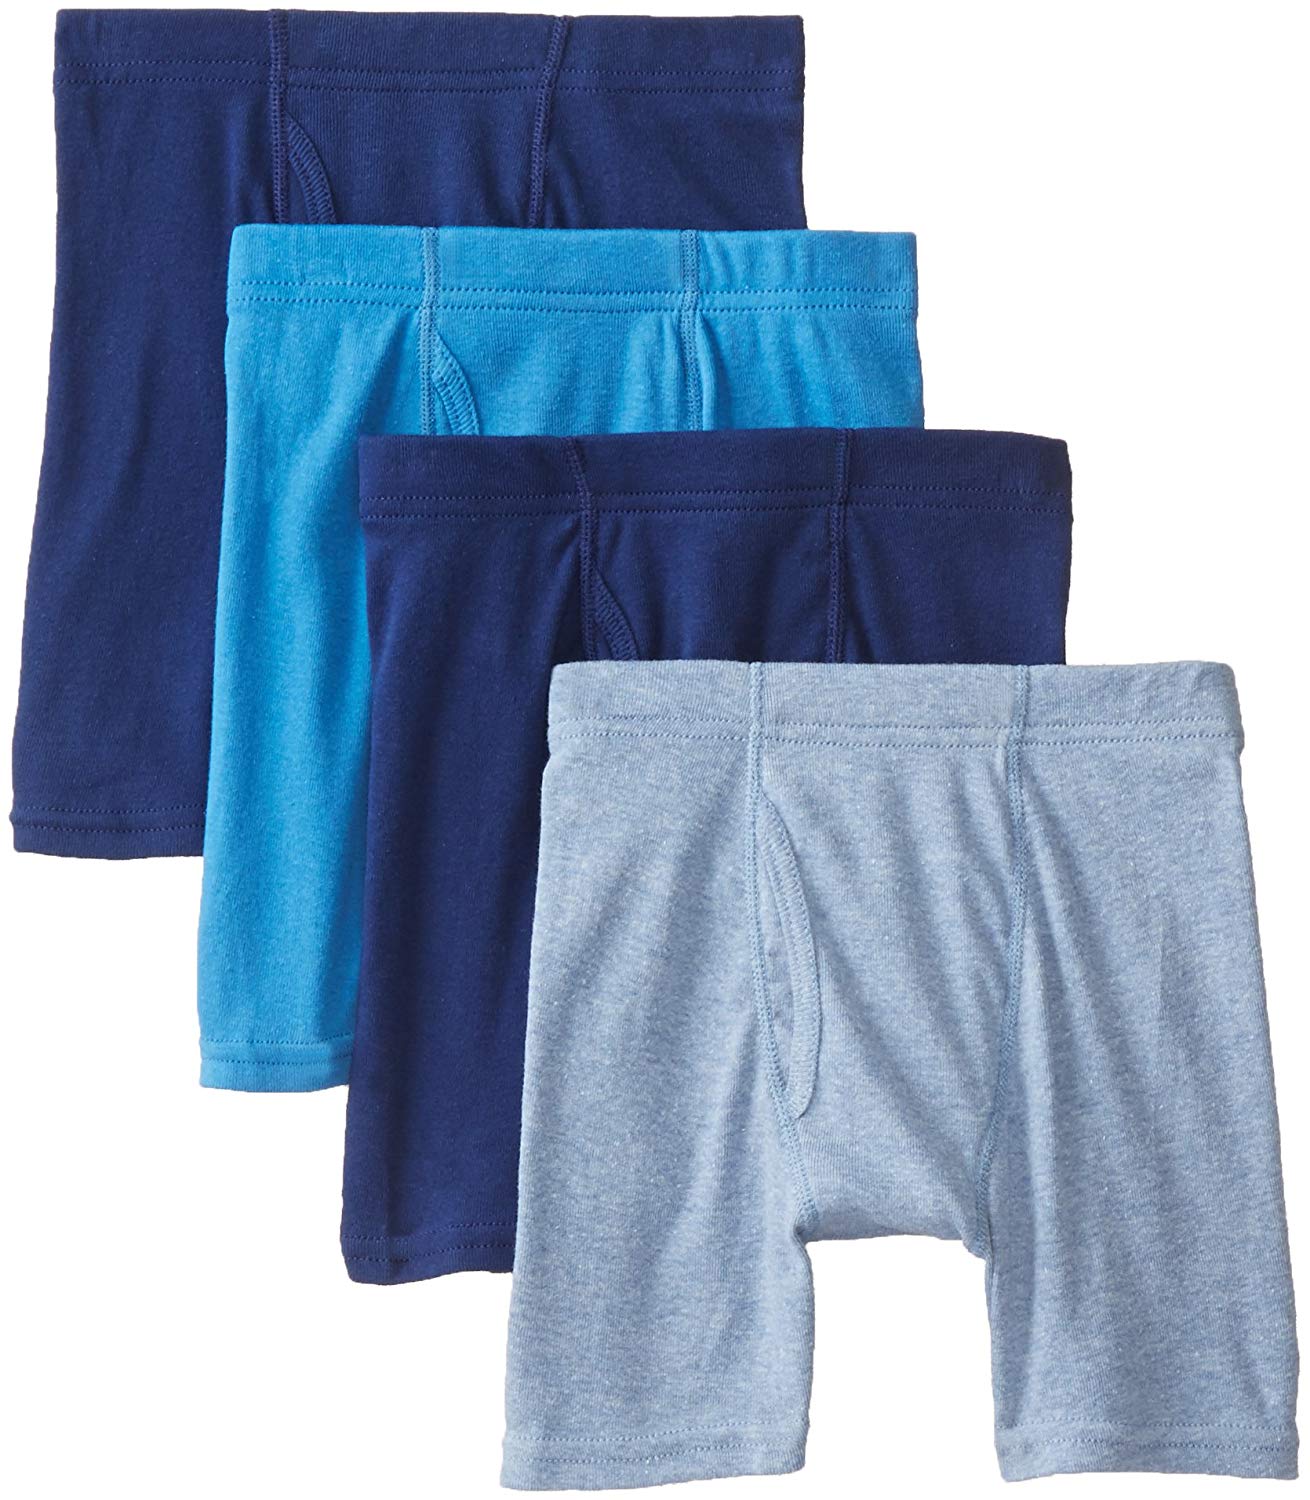 Hanes Boys' 4 Pack Ultimate Comfortsoft Blue Dyed Boxer, Assorted, Size ...